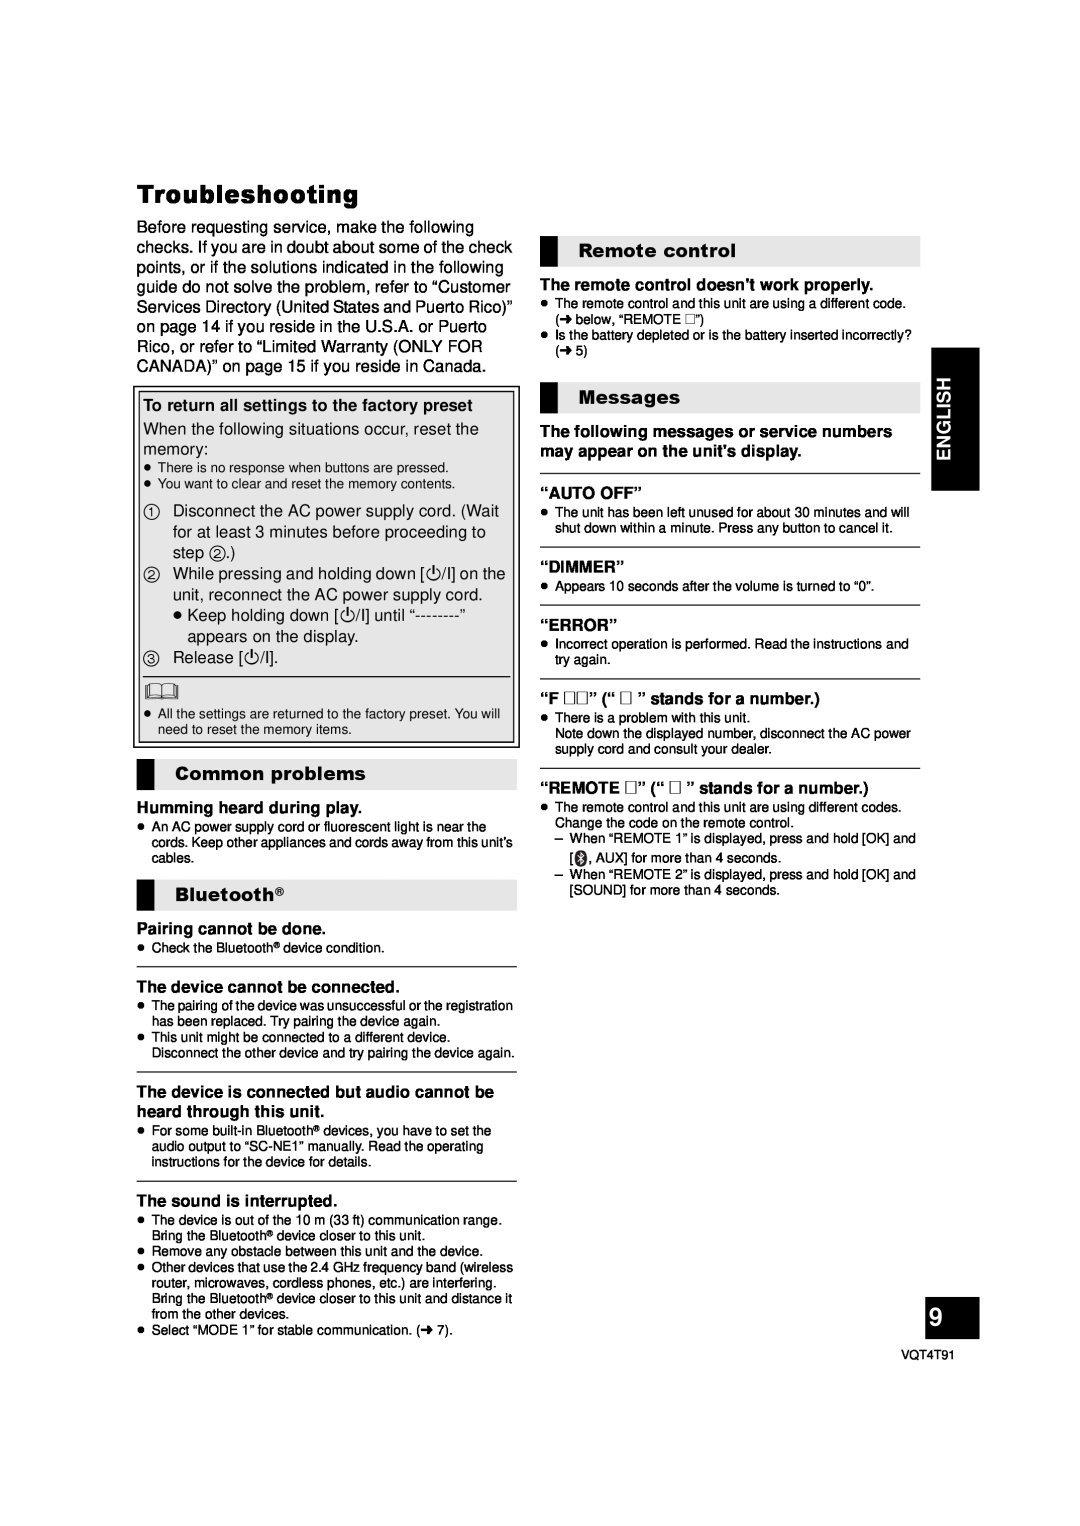 Panasonic SC-NE1 owner manual Troubleshooting, Common problems, Bluetooth, Remote control, Messages, English 